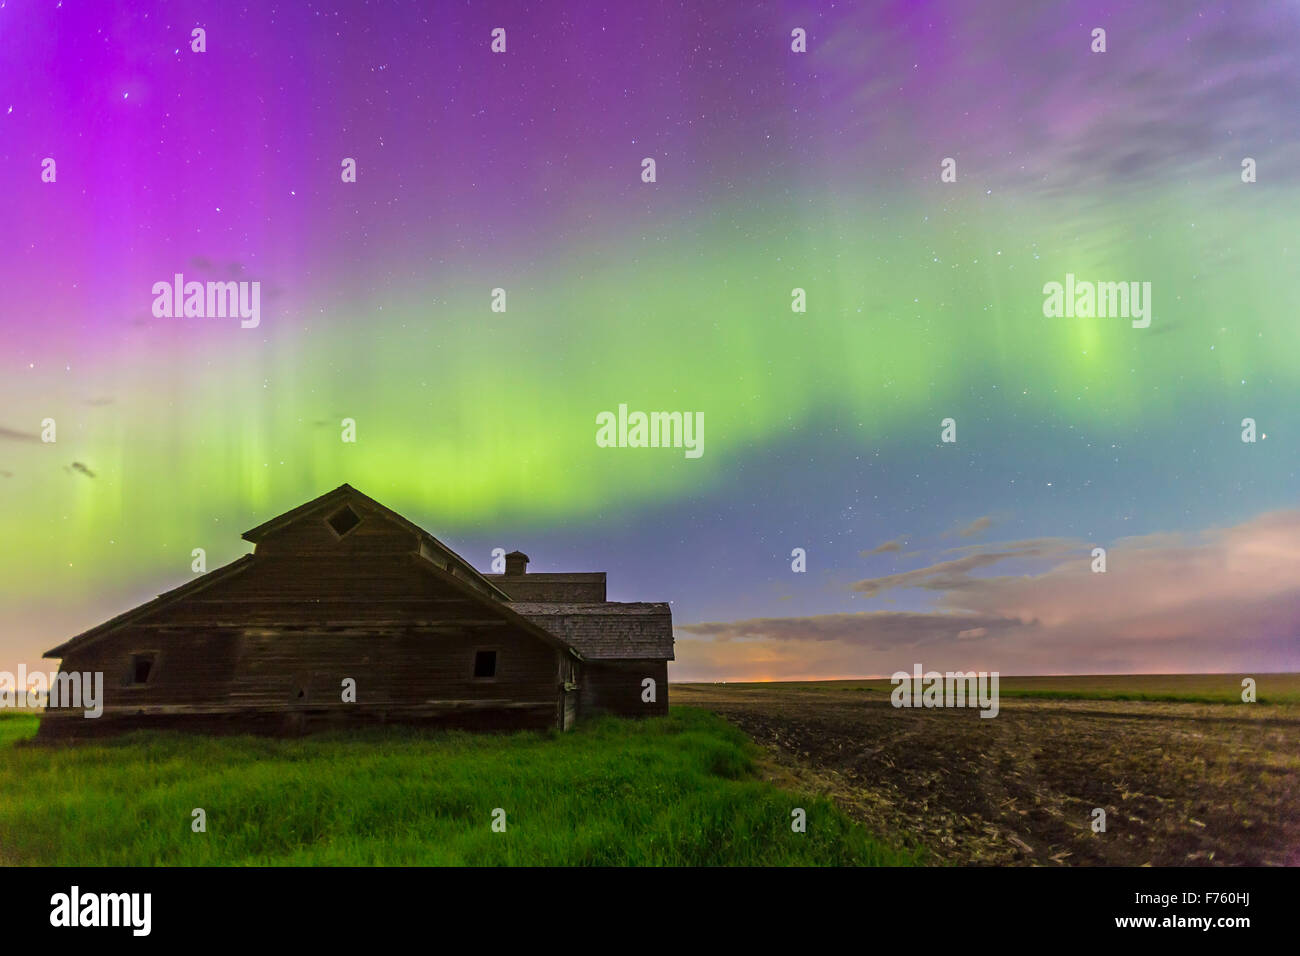 An all-sky aurora with green and purple curtains, the night of June 7-8, 2014, starting up about 12:30 and going until dawn. Thi Stock Photo